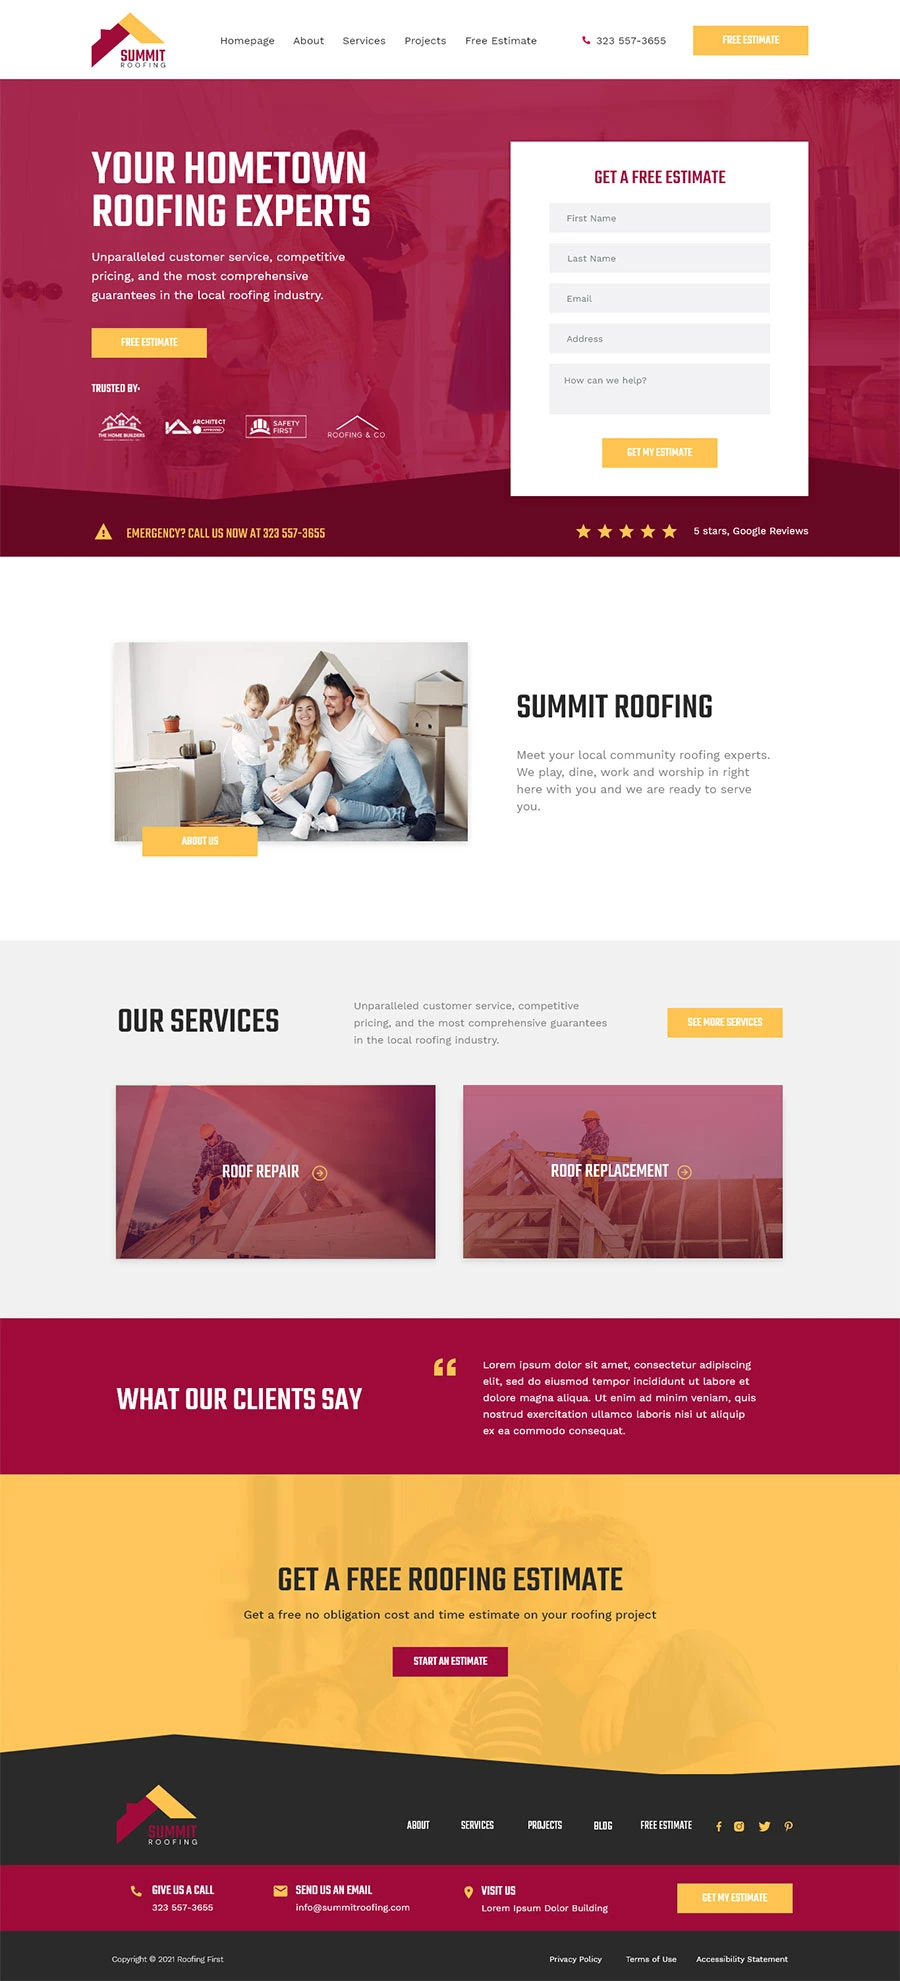 Summit Company Website Design Roofing